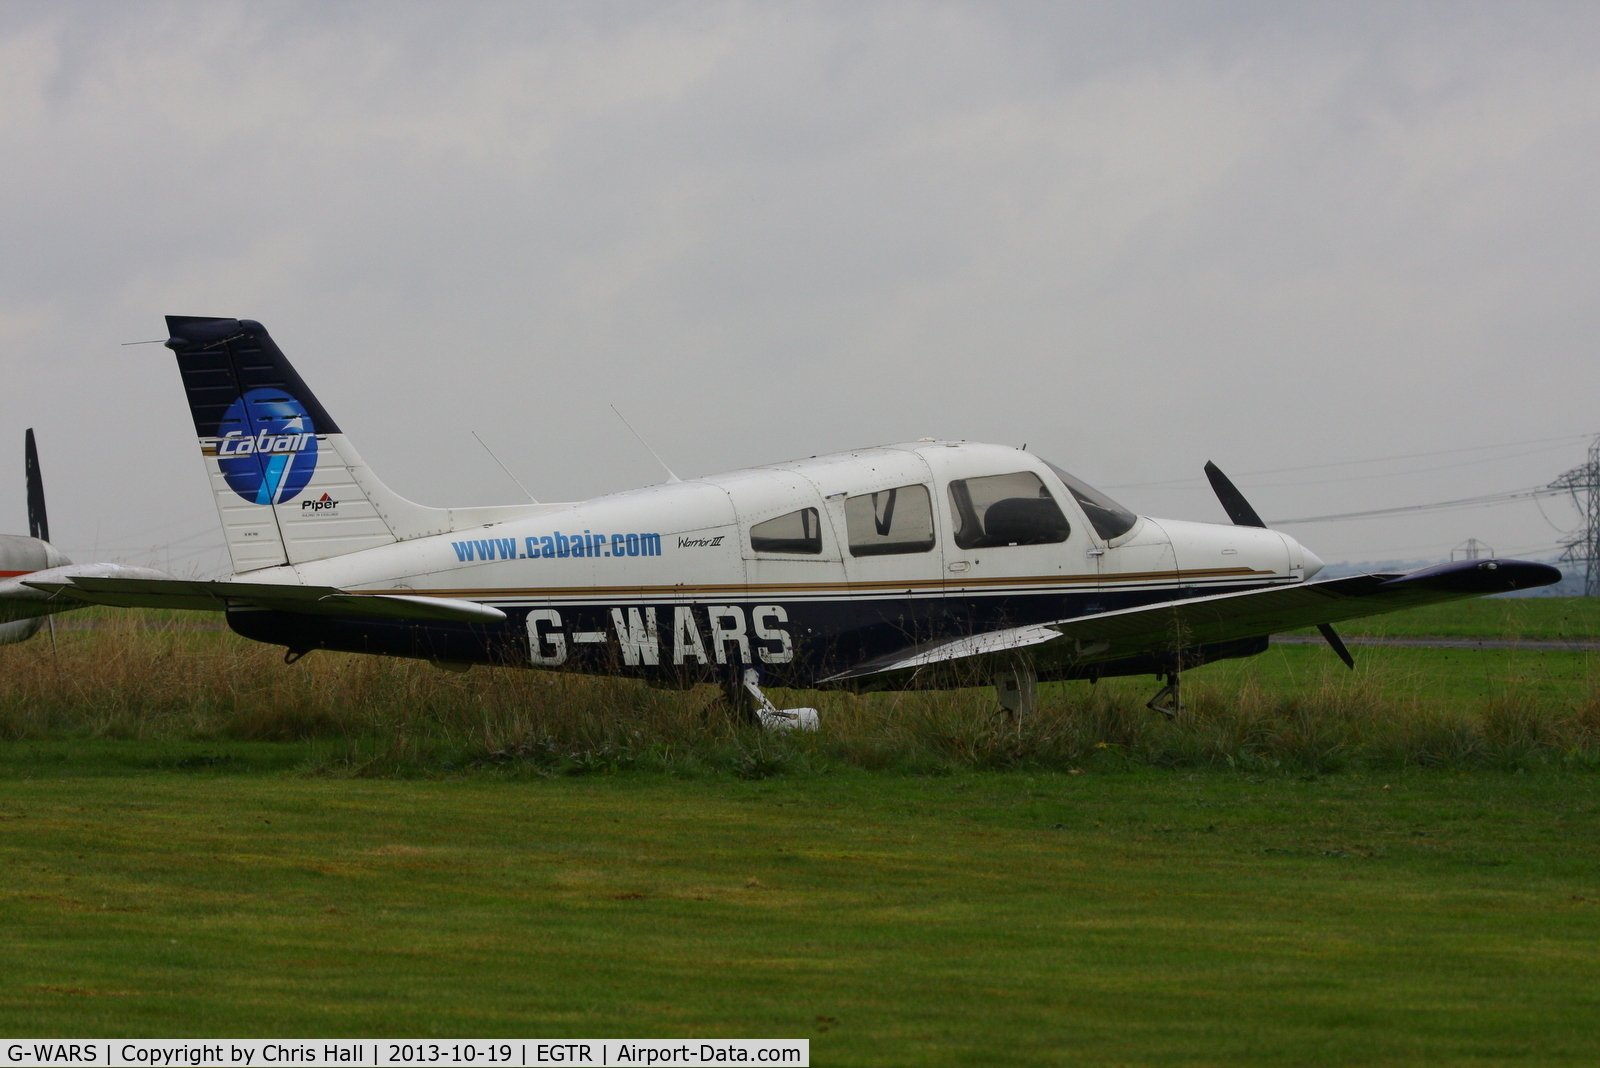 G-WARS, 1997 Piper PA-28-161 Cherokee Warrior III C/N 2842022, now parked with the other wrecks & relics at Elstree